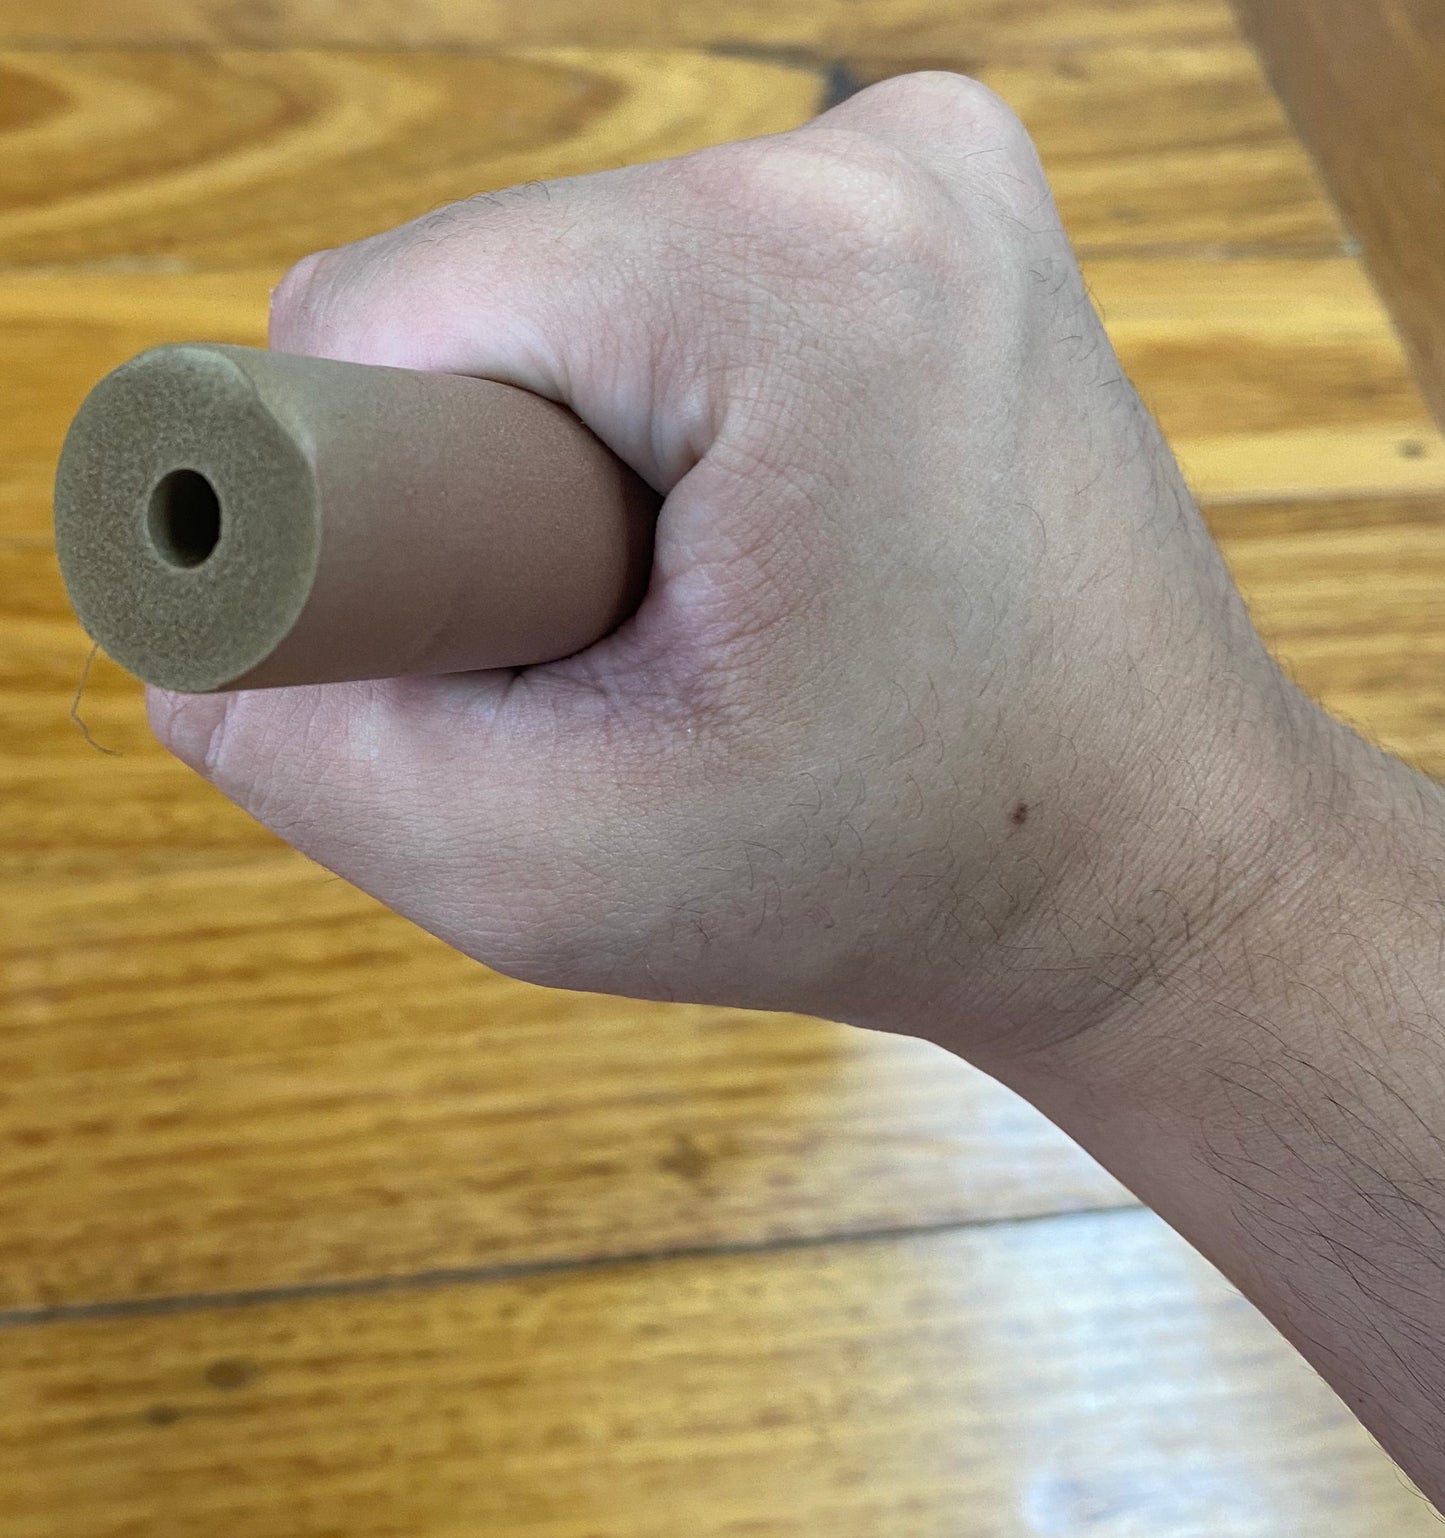 Foam Tubing - Ideal for hand grip build ups